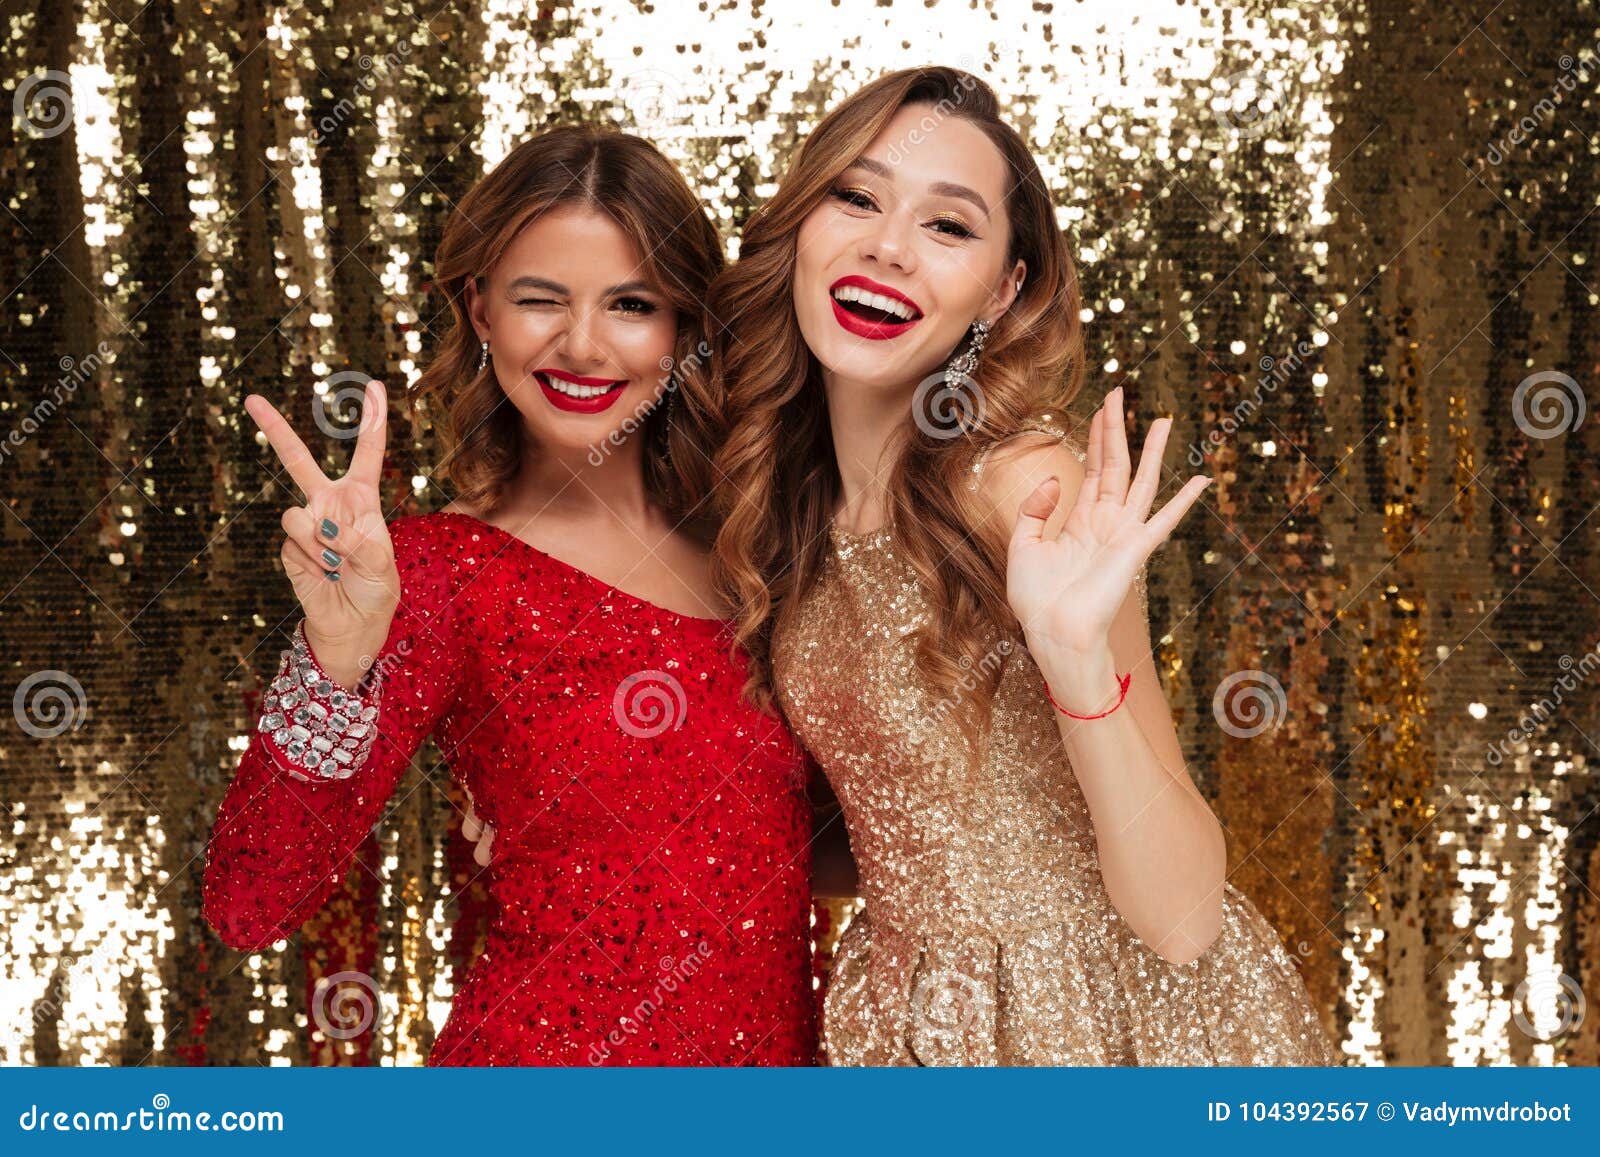 Portrait Of Two Cheerful Smiling Women In Sparkly Dresses Stock Image ...